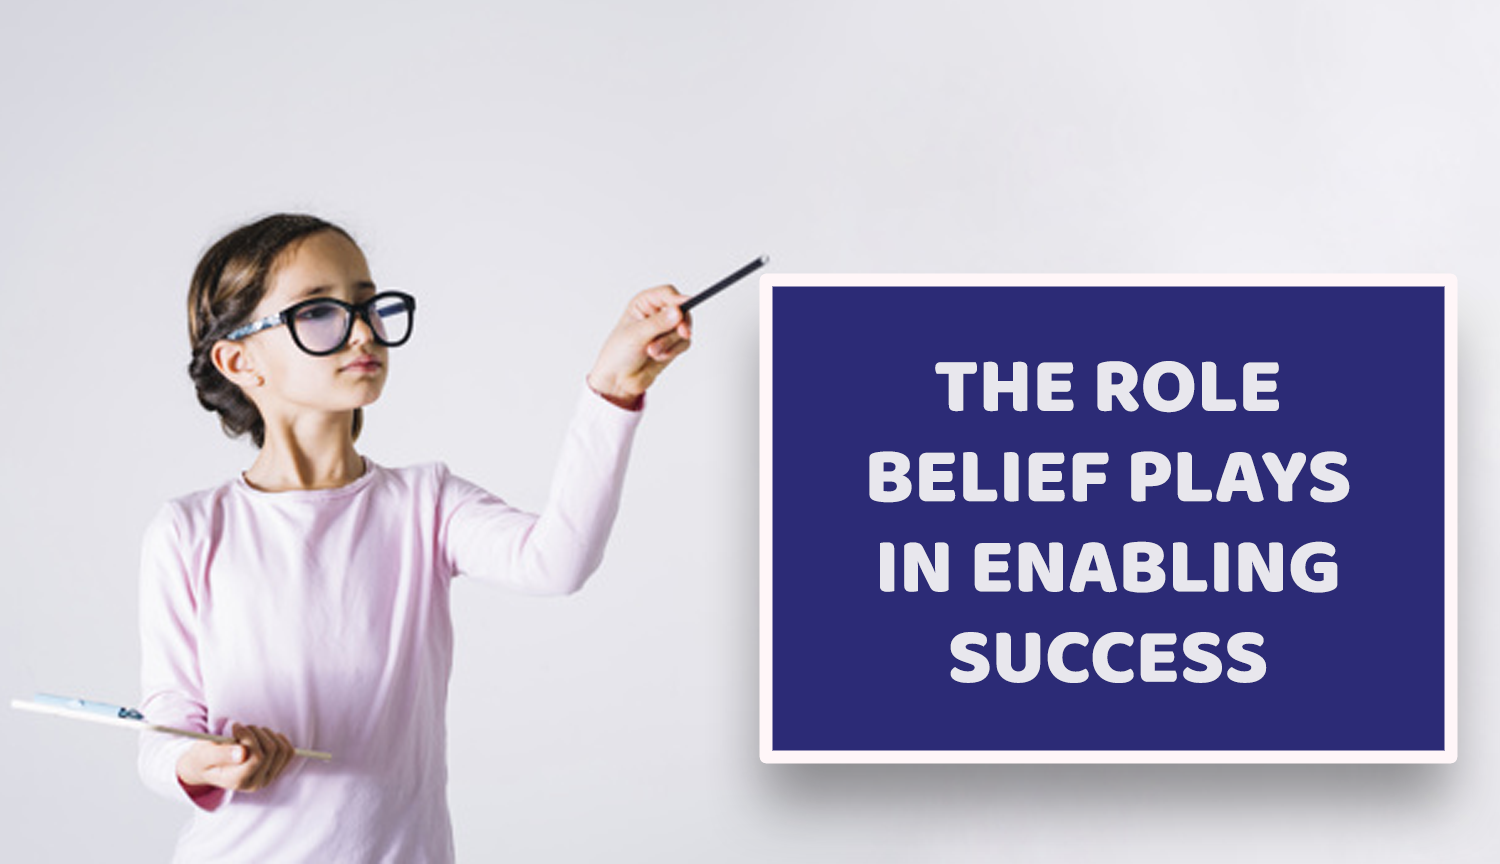 The role belief plays in enabling success
